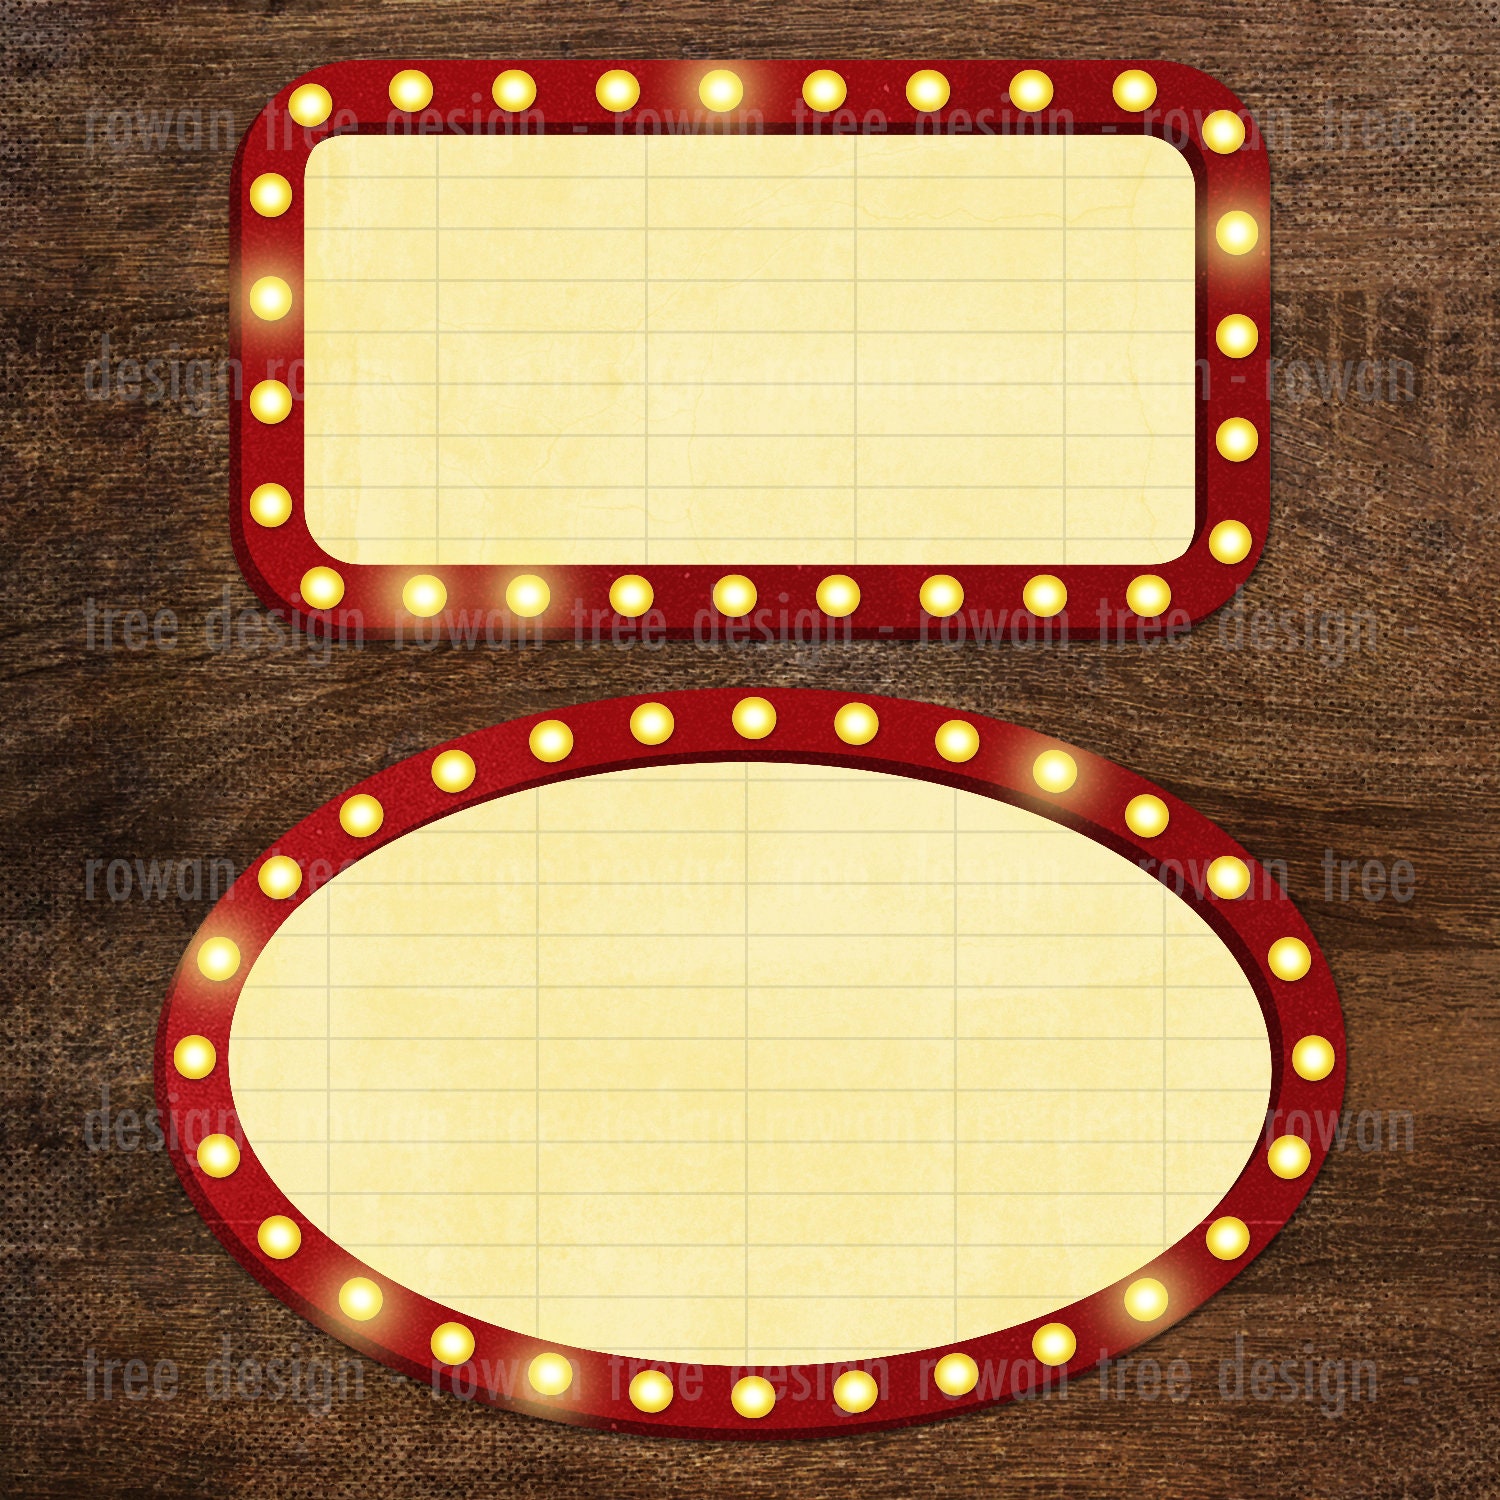 movie theater sign clipart torrent